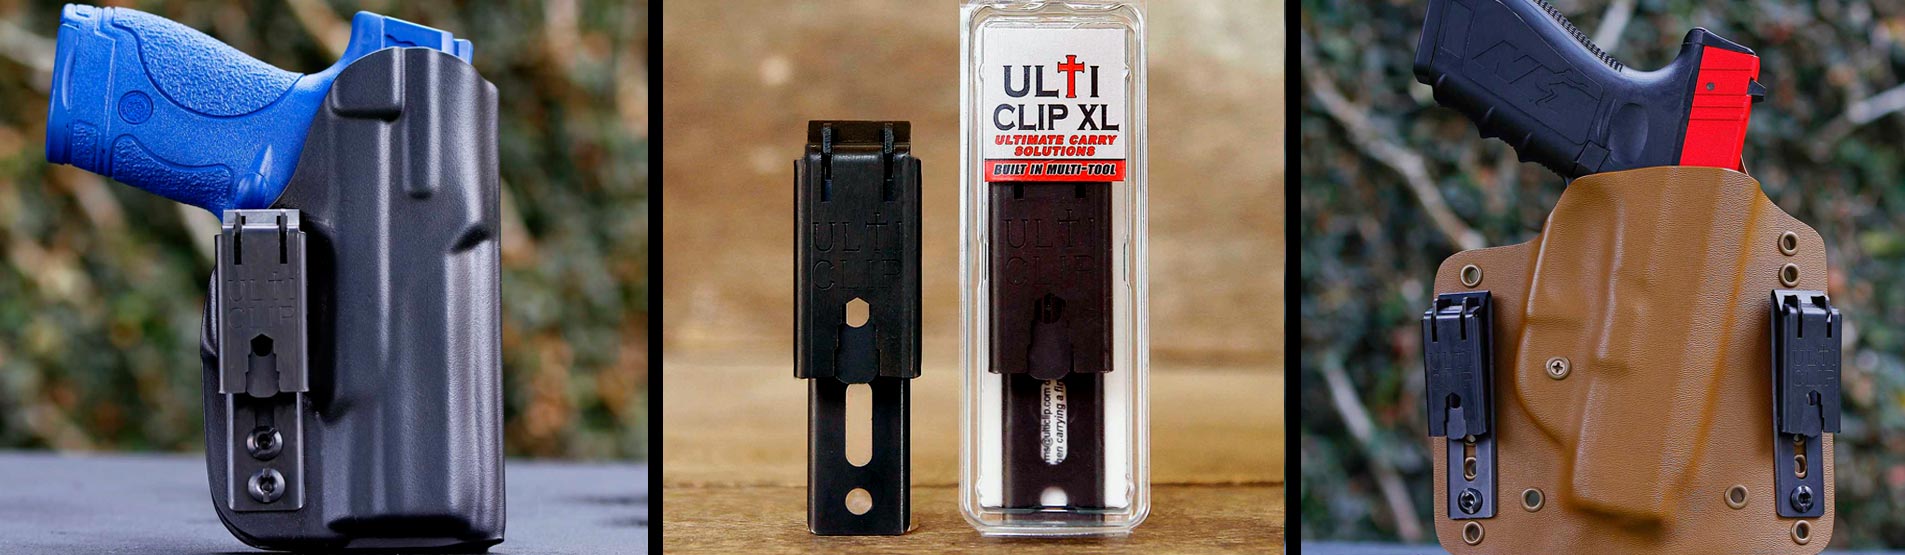 Ulticlip RH Holsters®